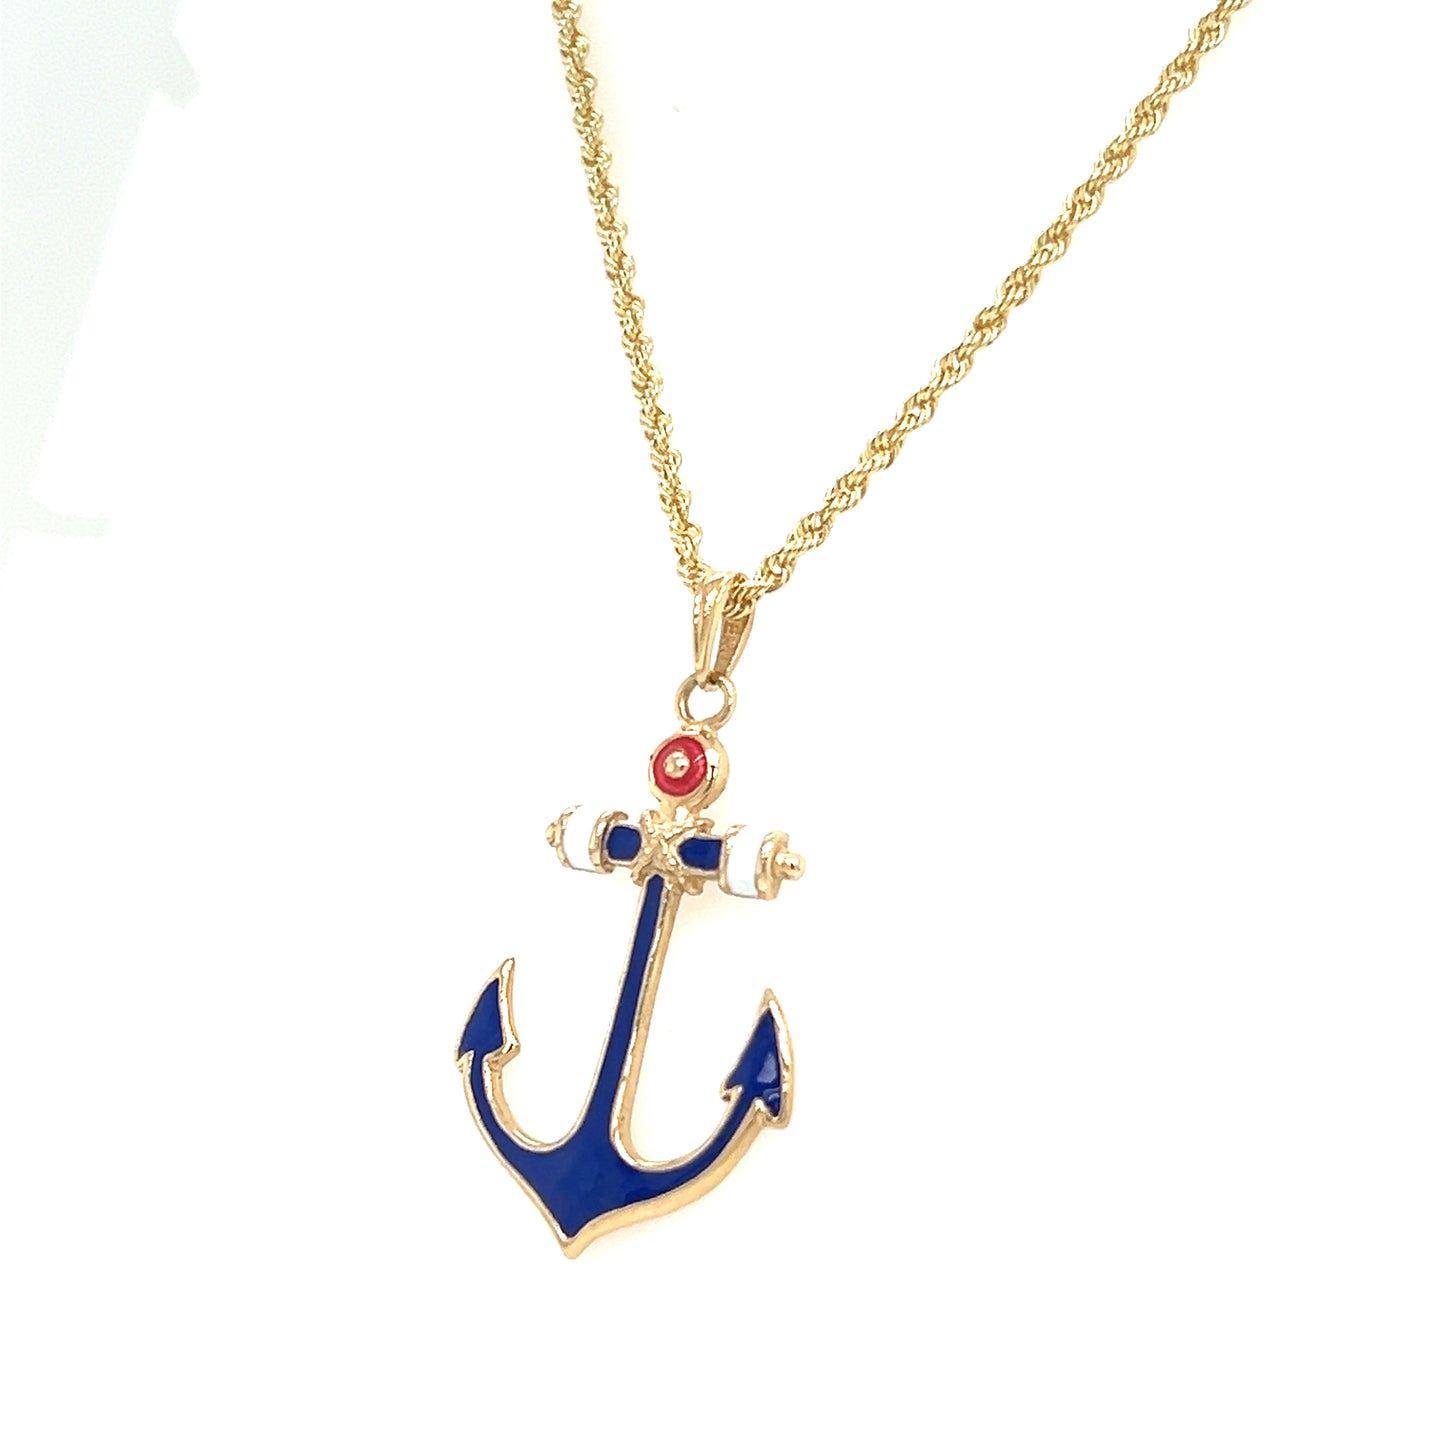 Anchor Pendant with Red White and Blue Enamel in 14K Yellow Gold Pendant on Chain Right Side View